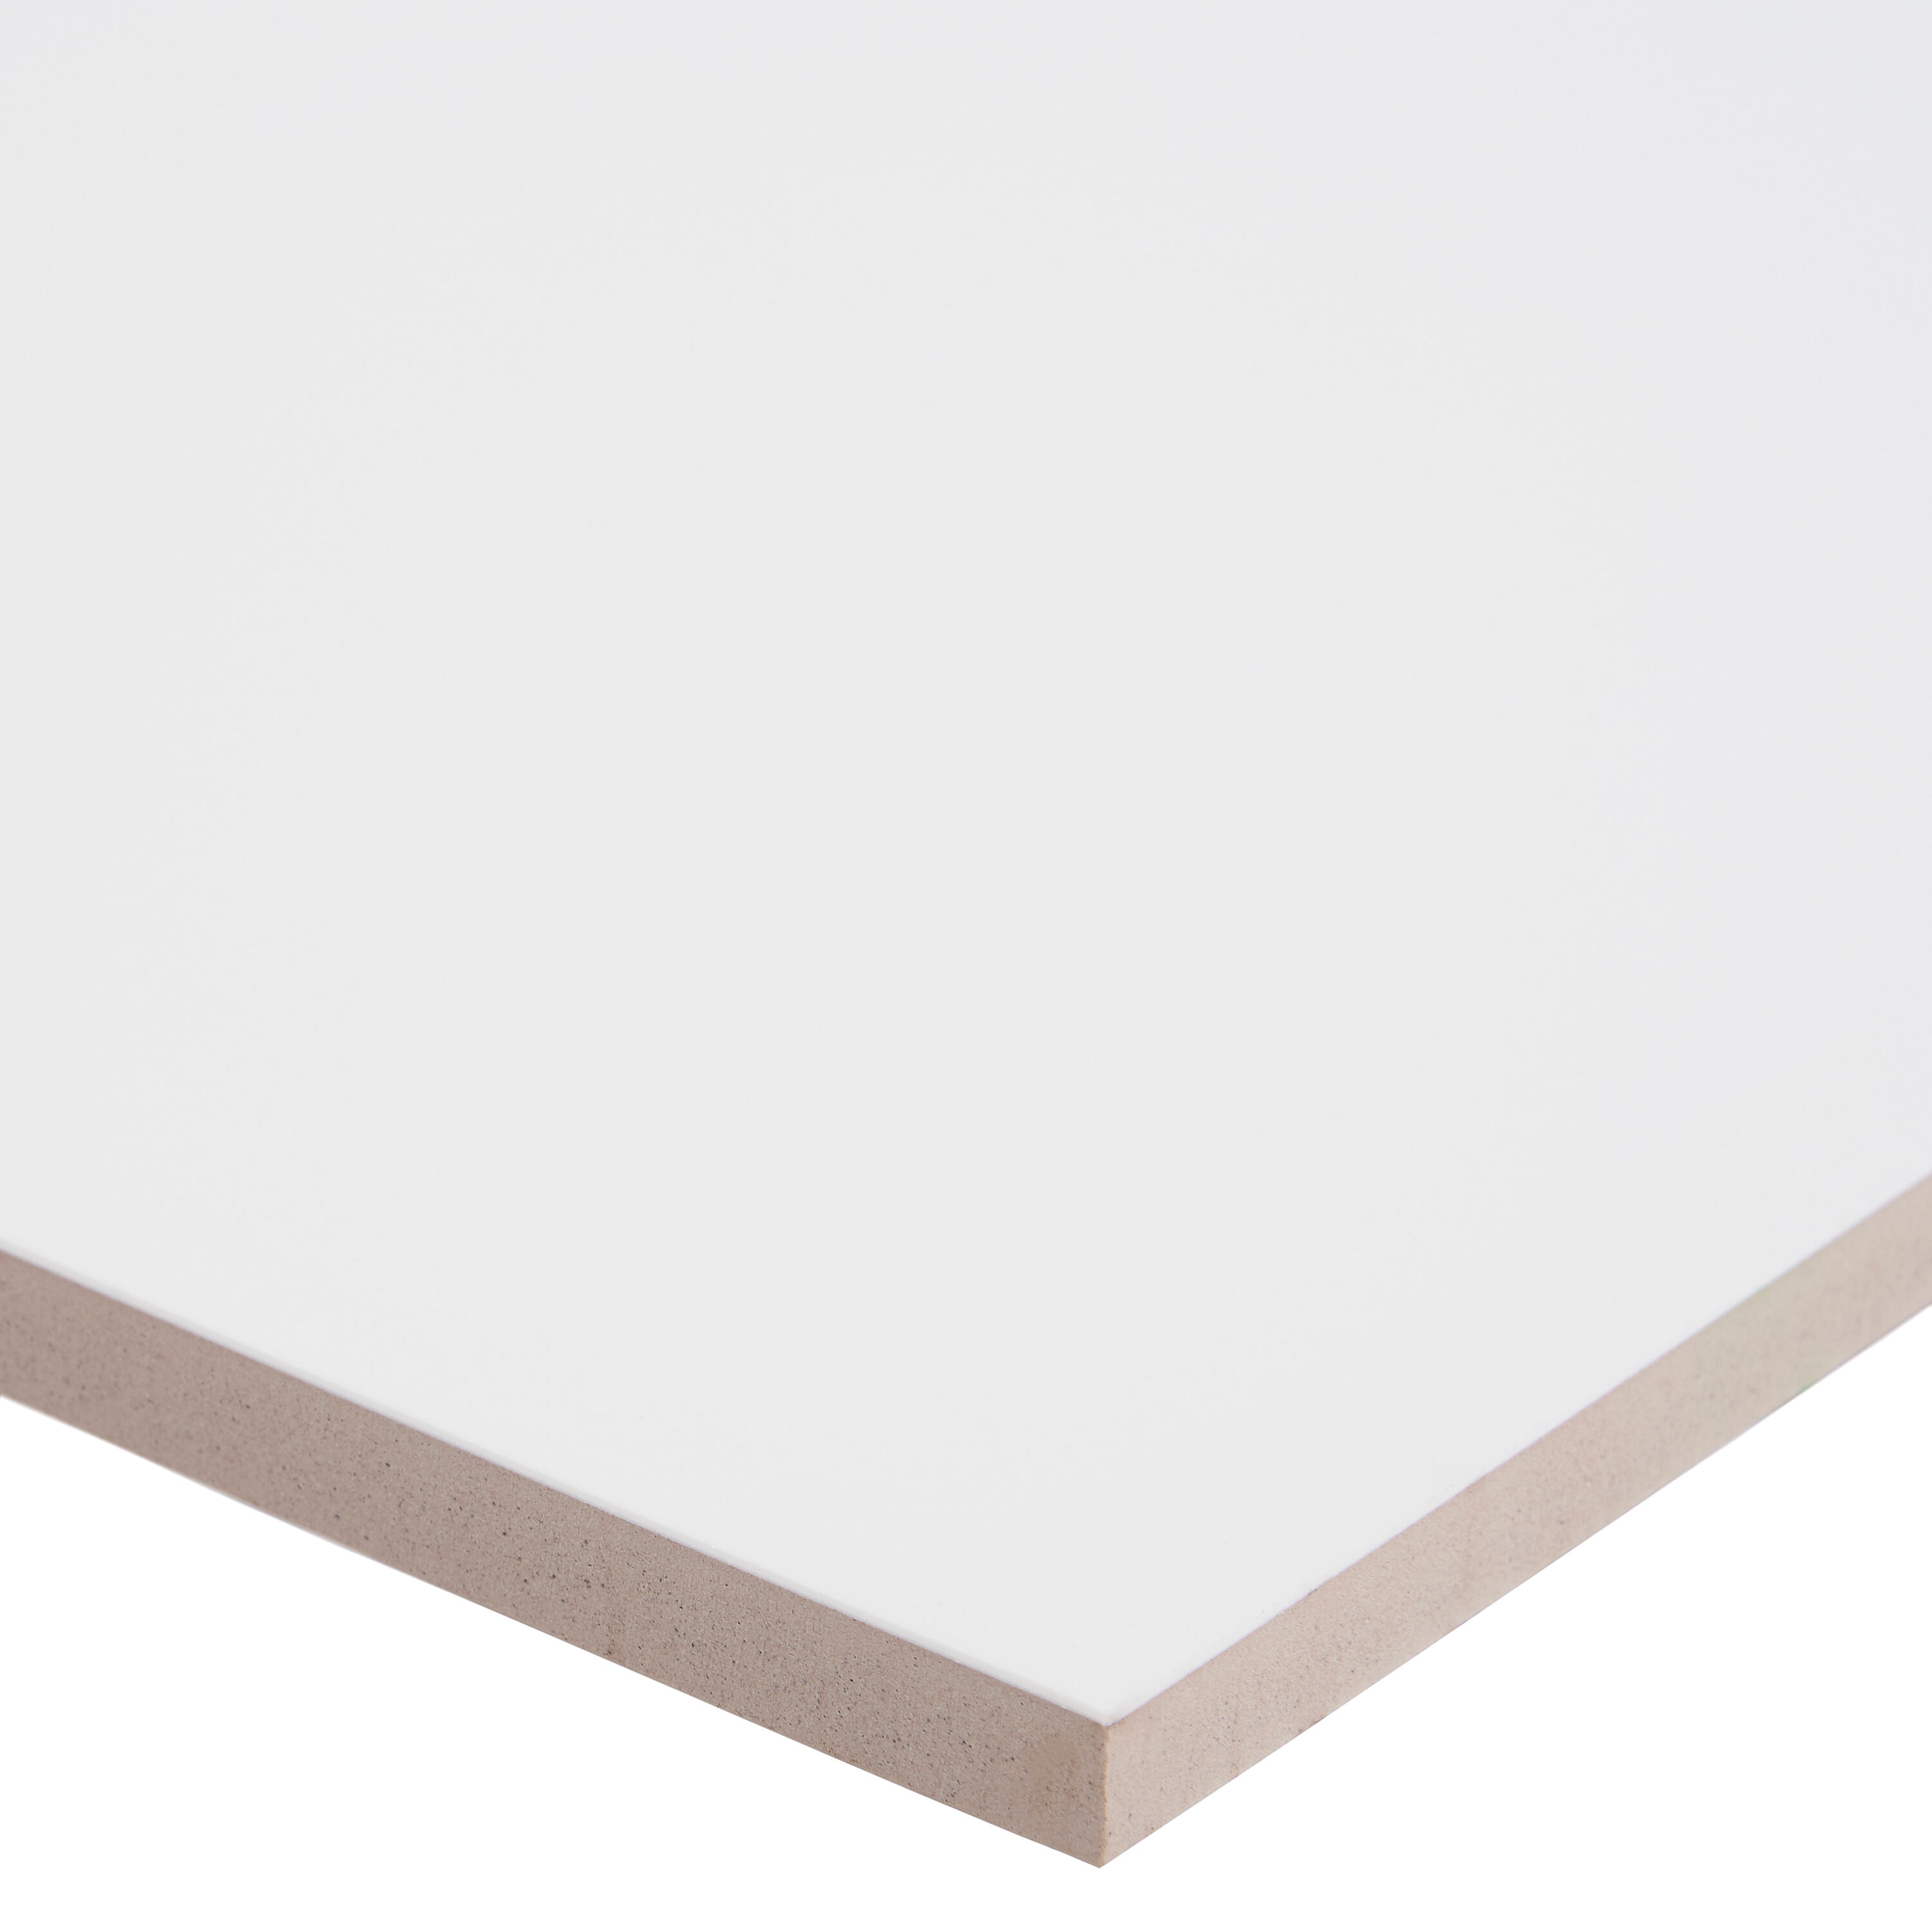 Artmore Tile Primary White 12-in x 24-in Polished Porcelain Wall Tile ...